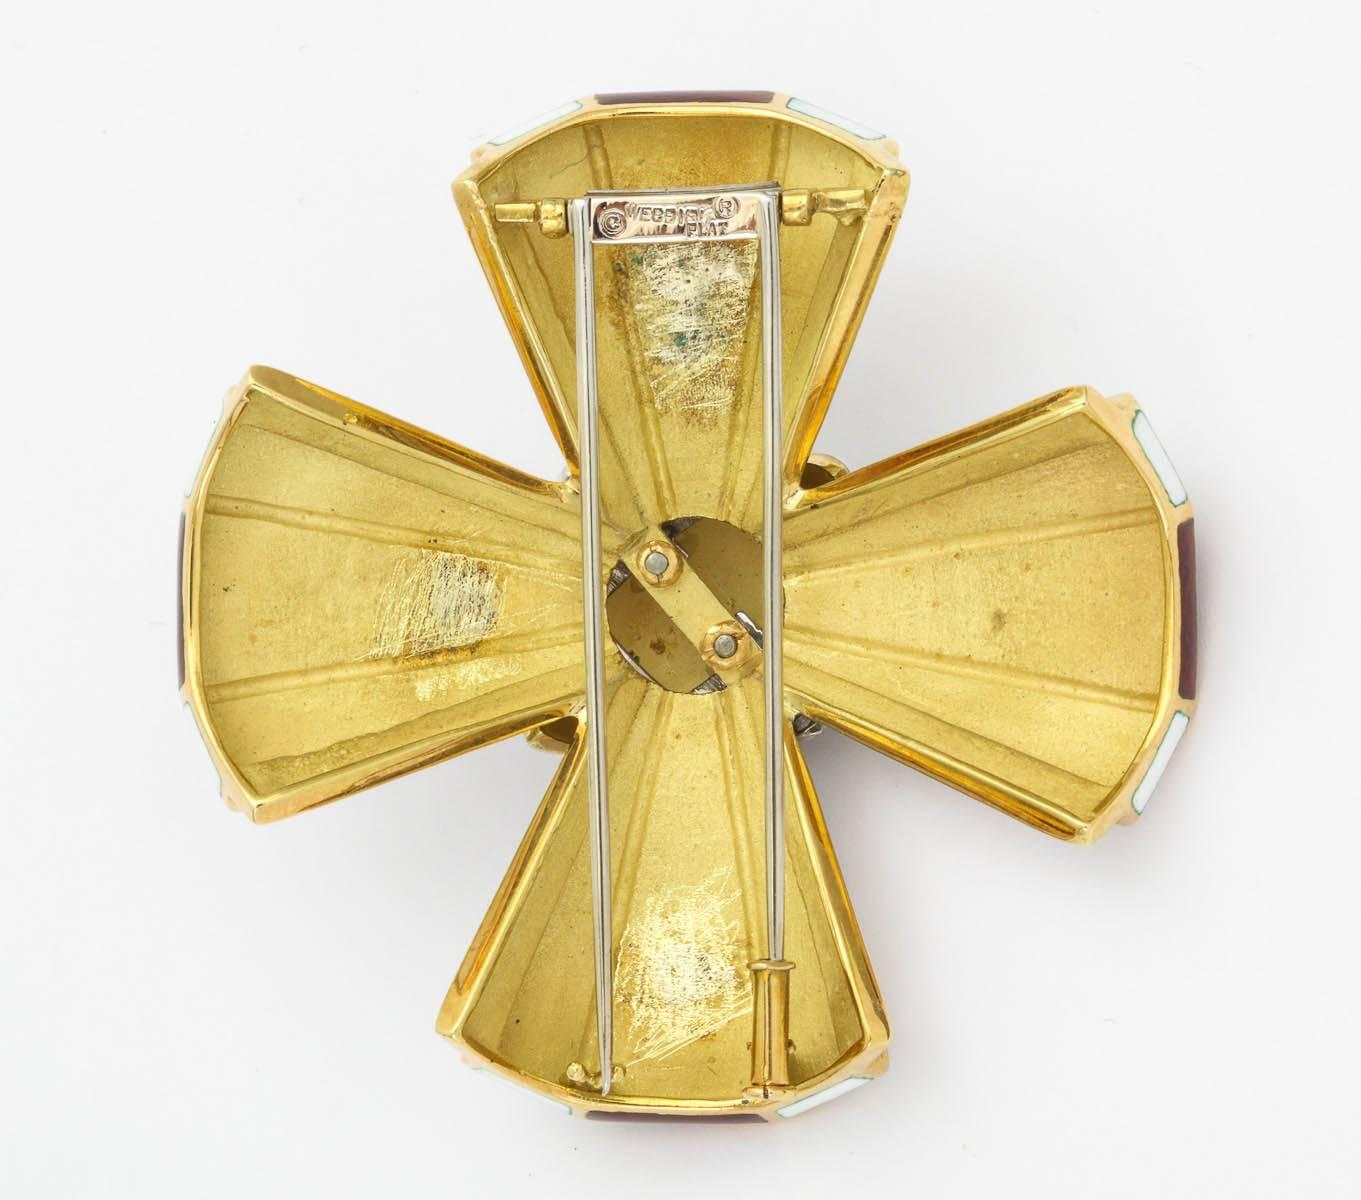 18k yellow gold burgundy and ivory enamel Maltese cross design brooch with white coral and diamond center  attributed to David Webb